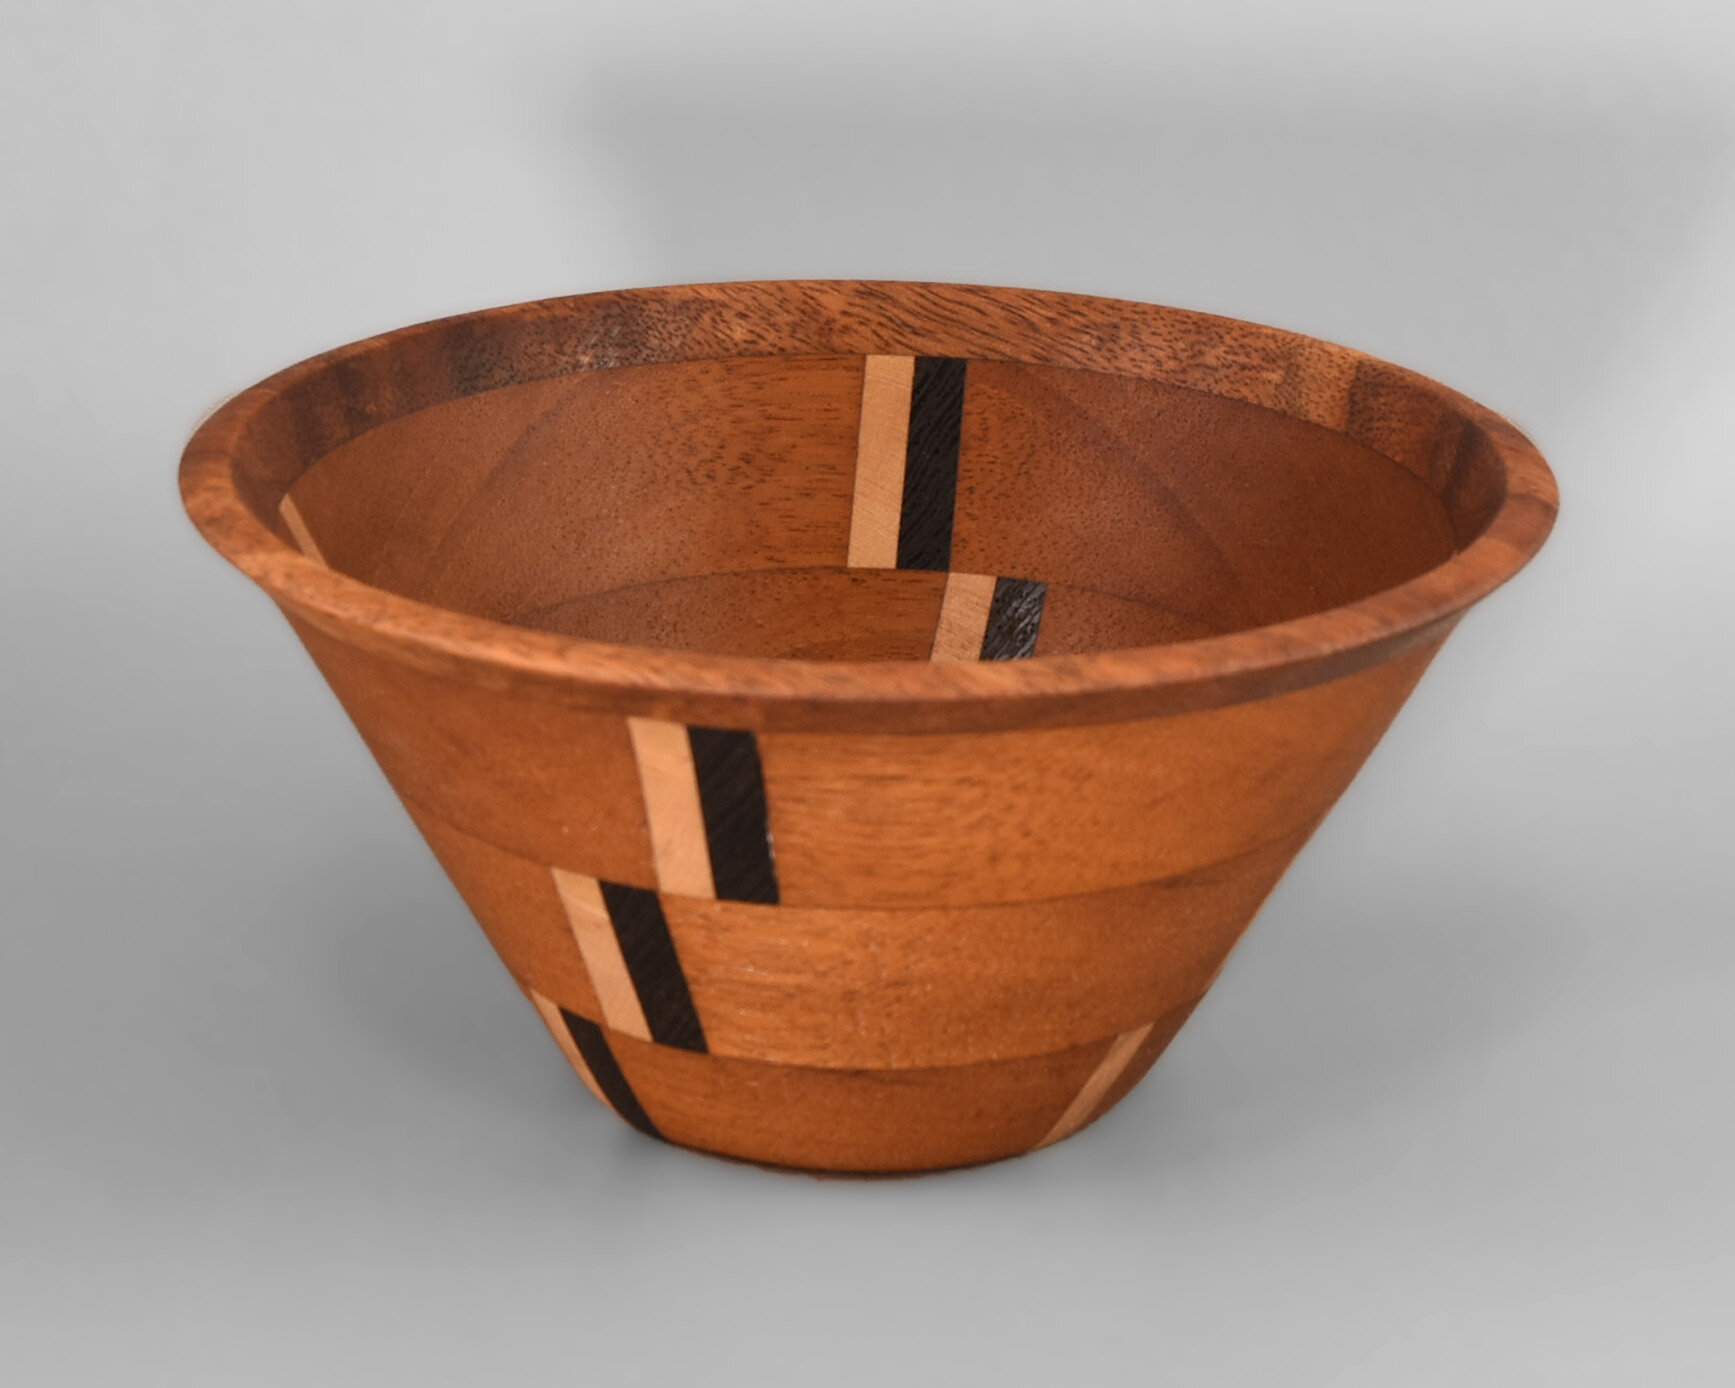 Bryan Richardson's Bowl from a Board